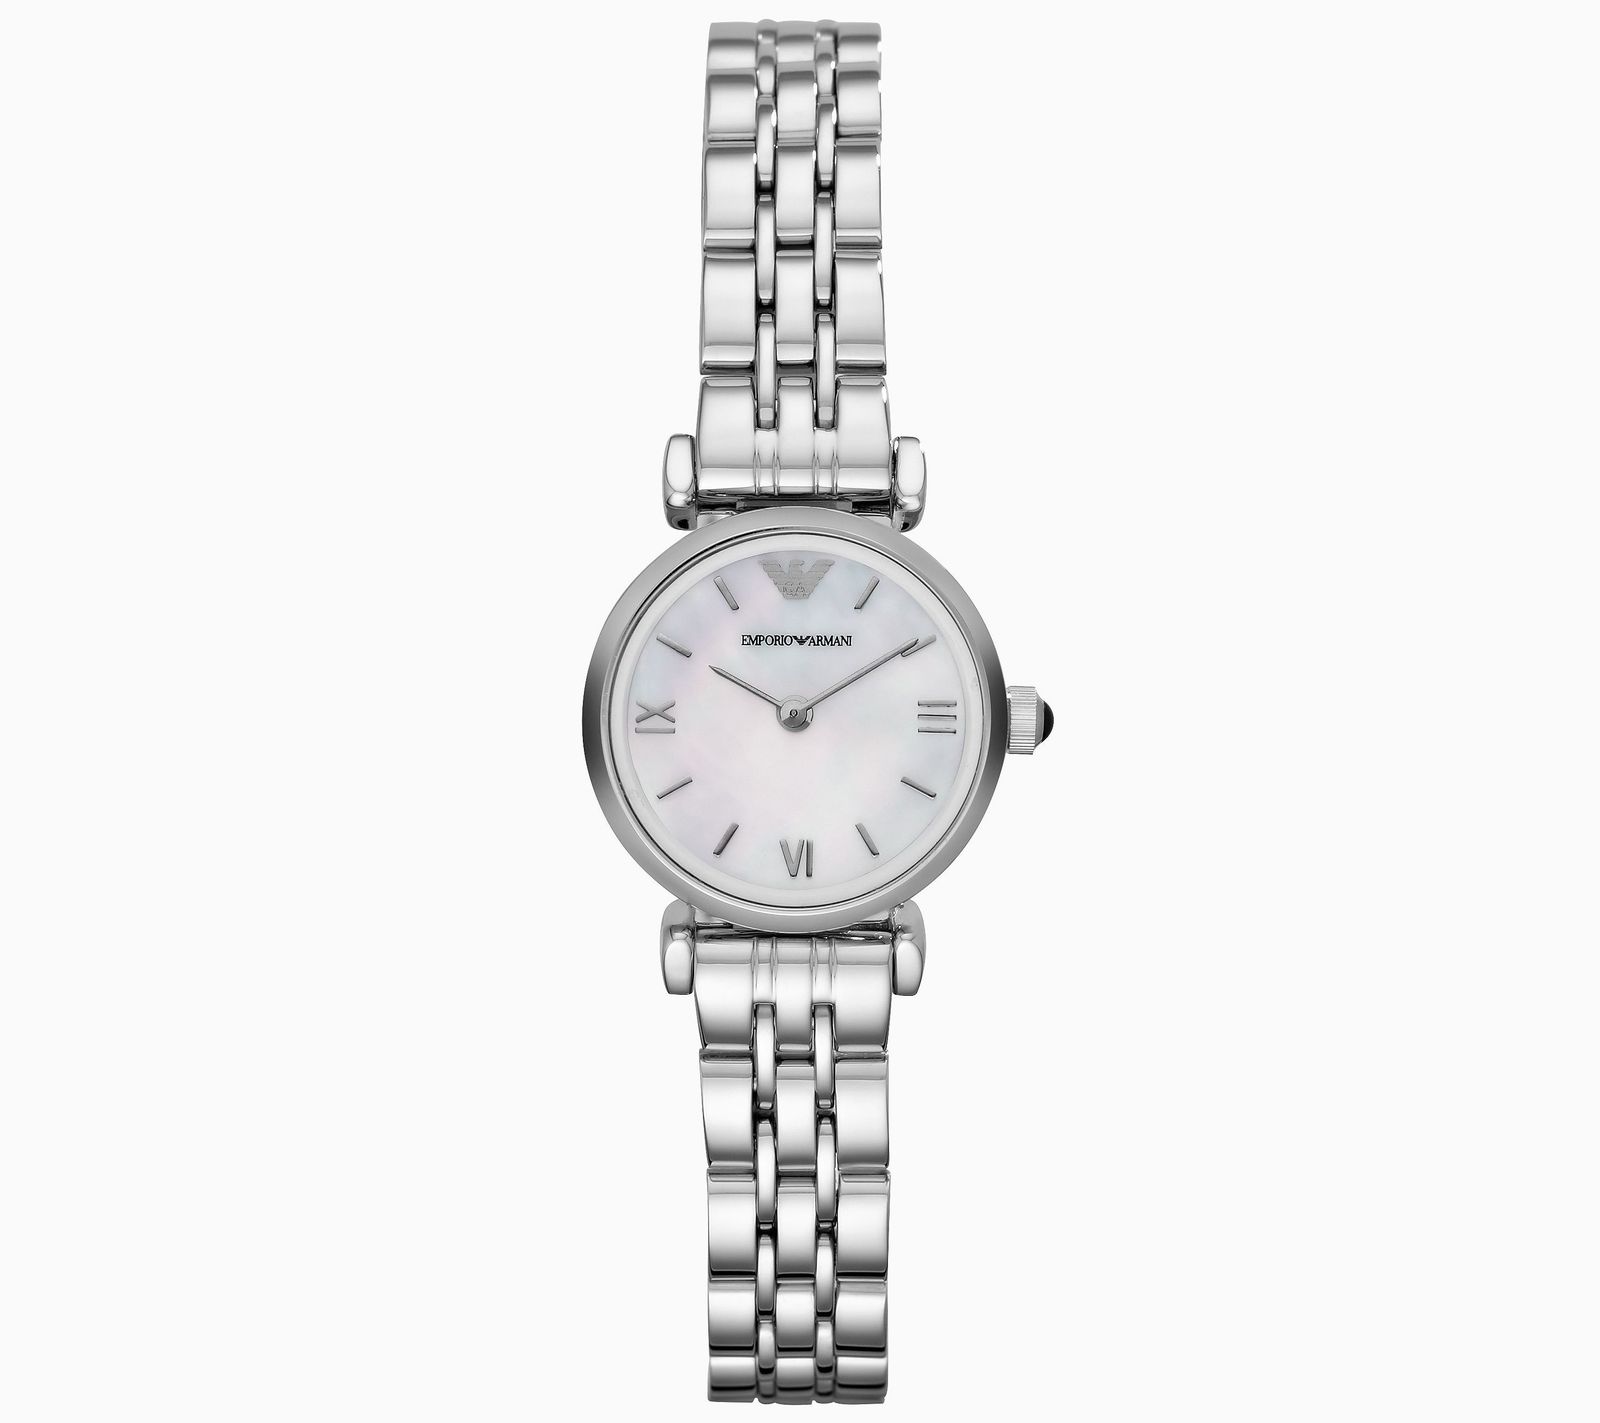 New Emporio Armani Women's Mother of Pearl Dial Stainless Steel Watch AR1763